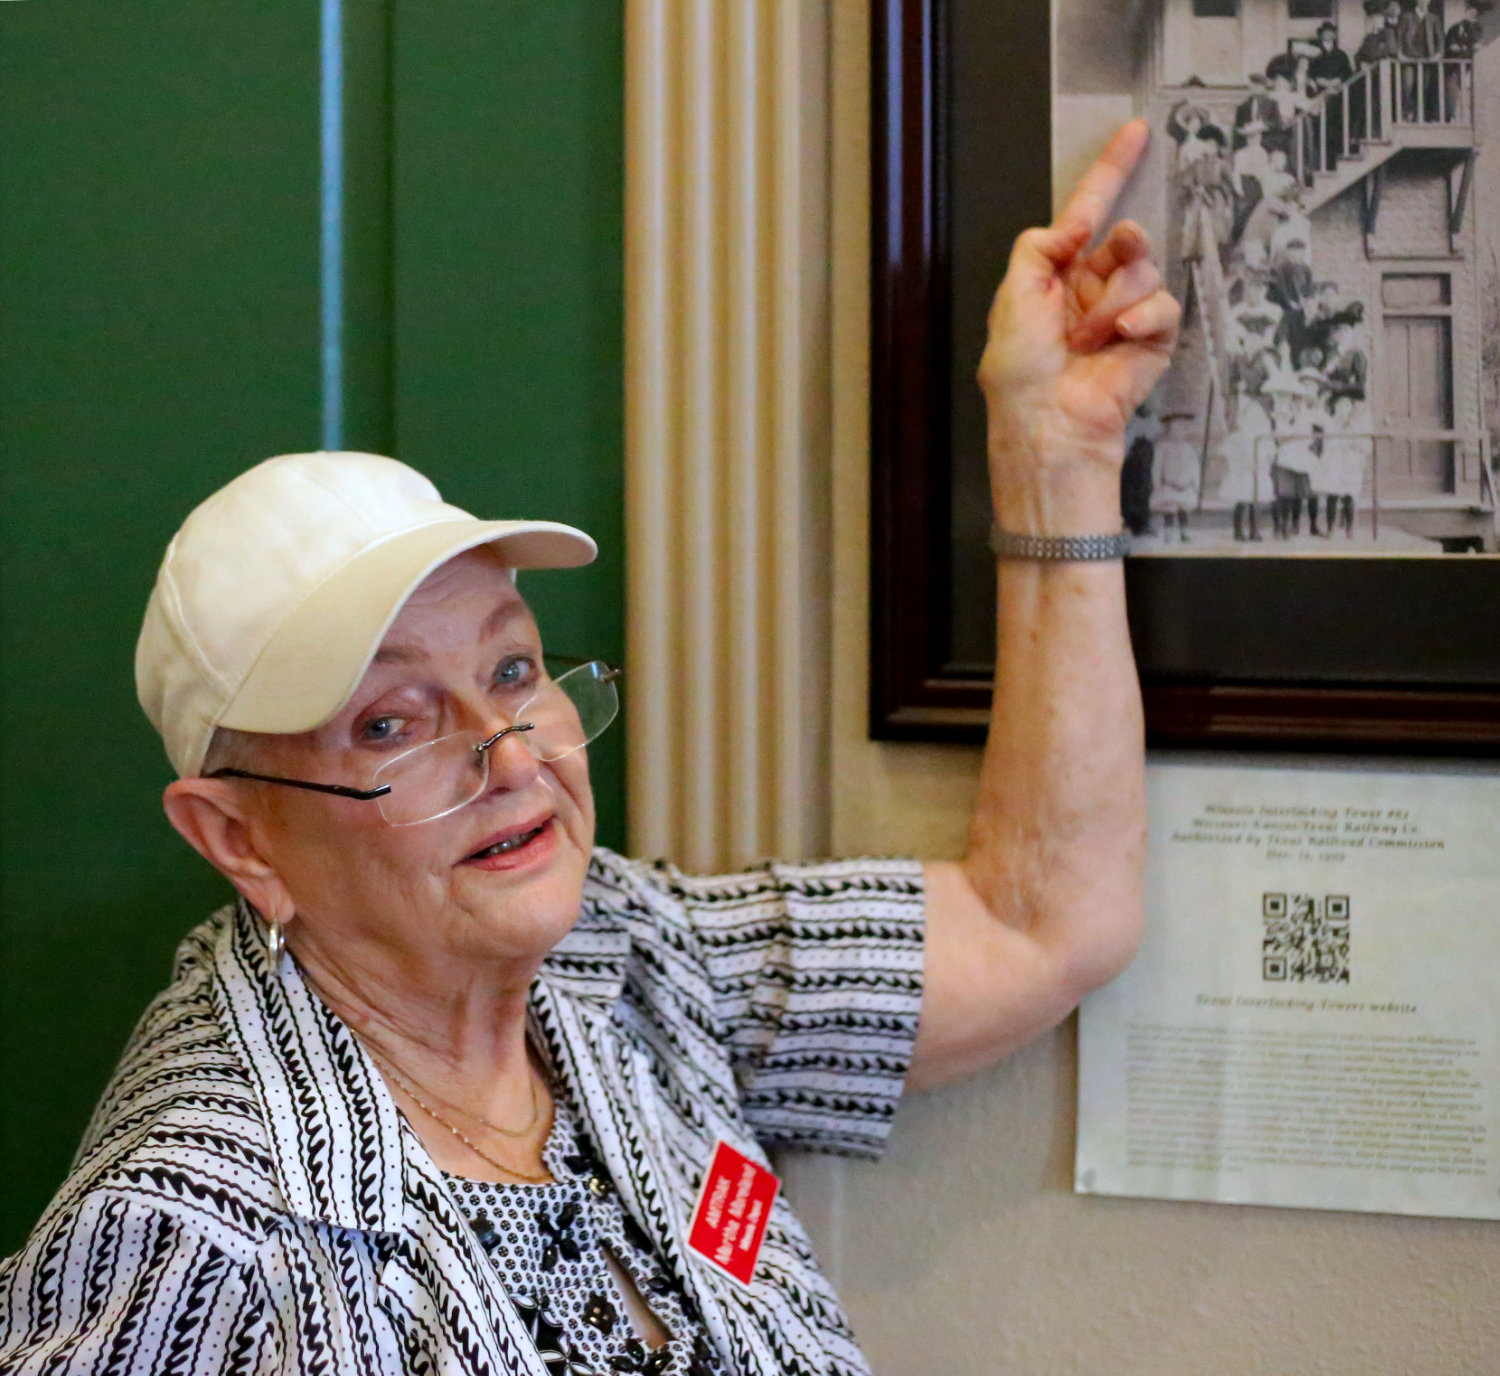 Station host Martha Moreland points out her grandfather, James Ross Cowen, in a photograph at the Interlocking Tower.